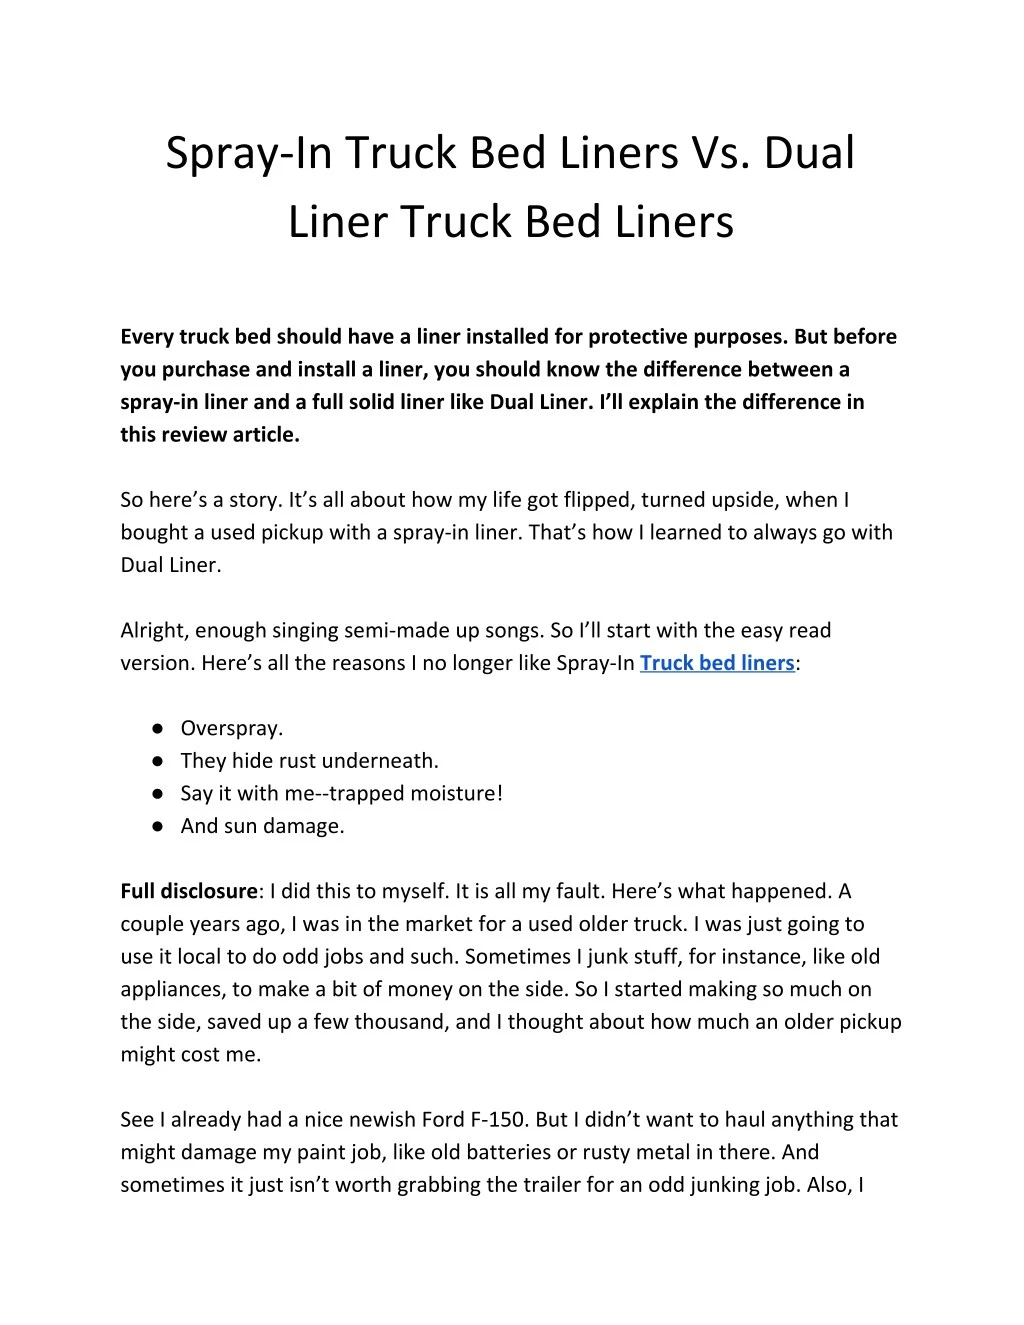 spray in truck bed liners vs dual liner truck